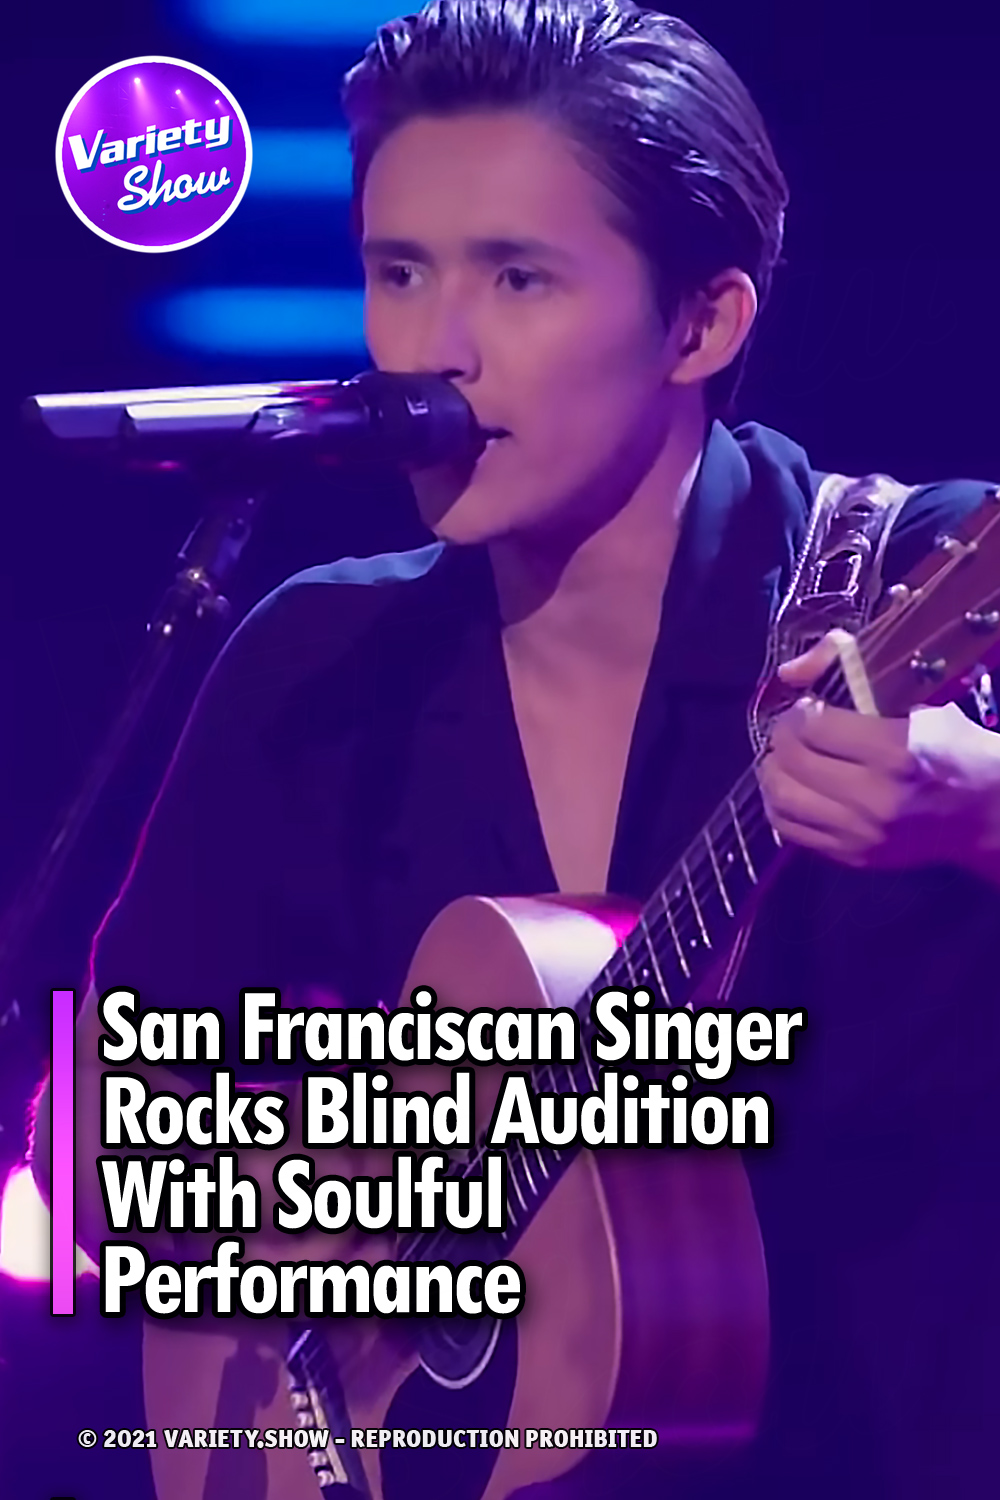 San Franciscan Singer Rocks Blind Audition With Soulful Performance